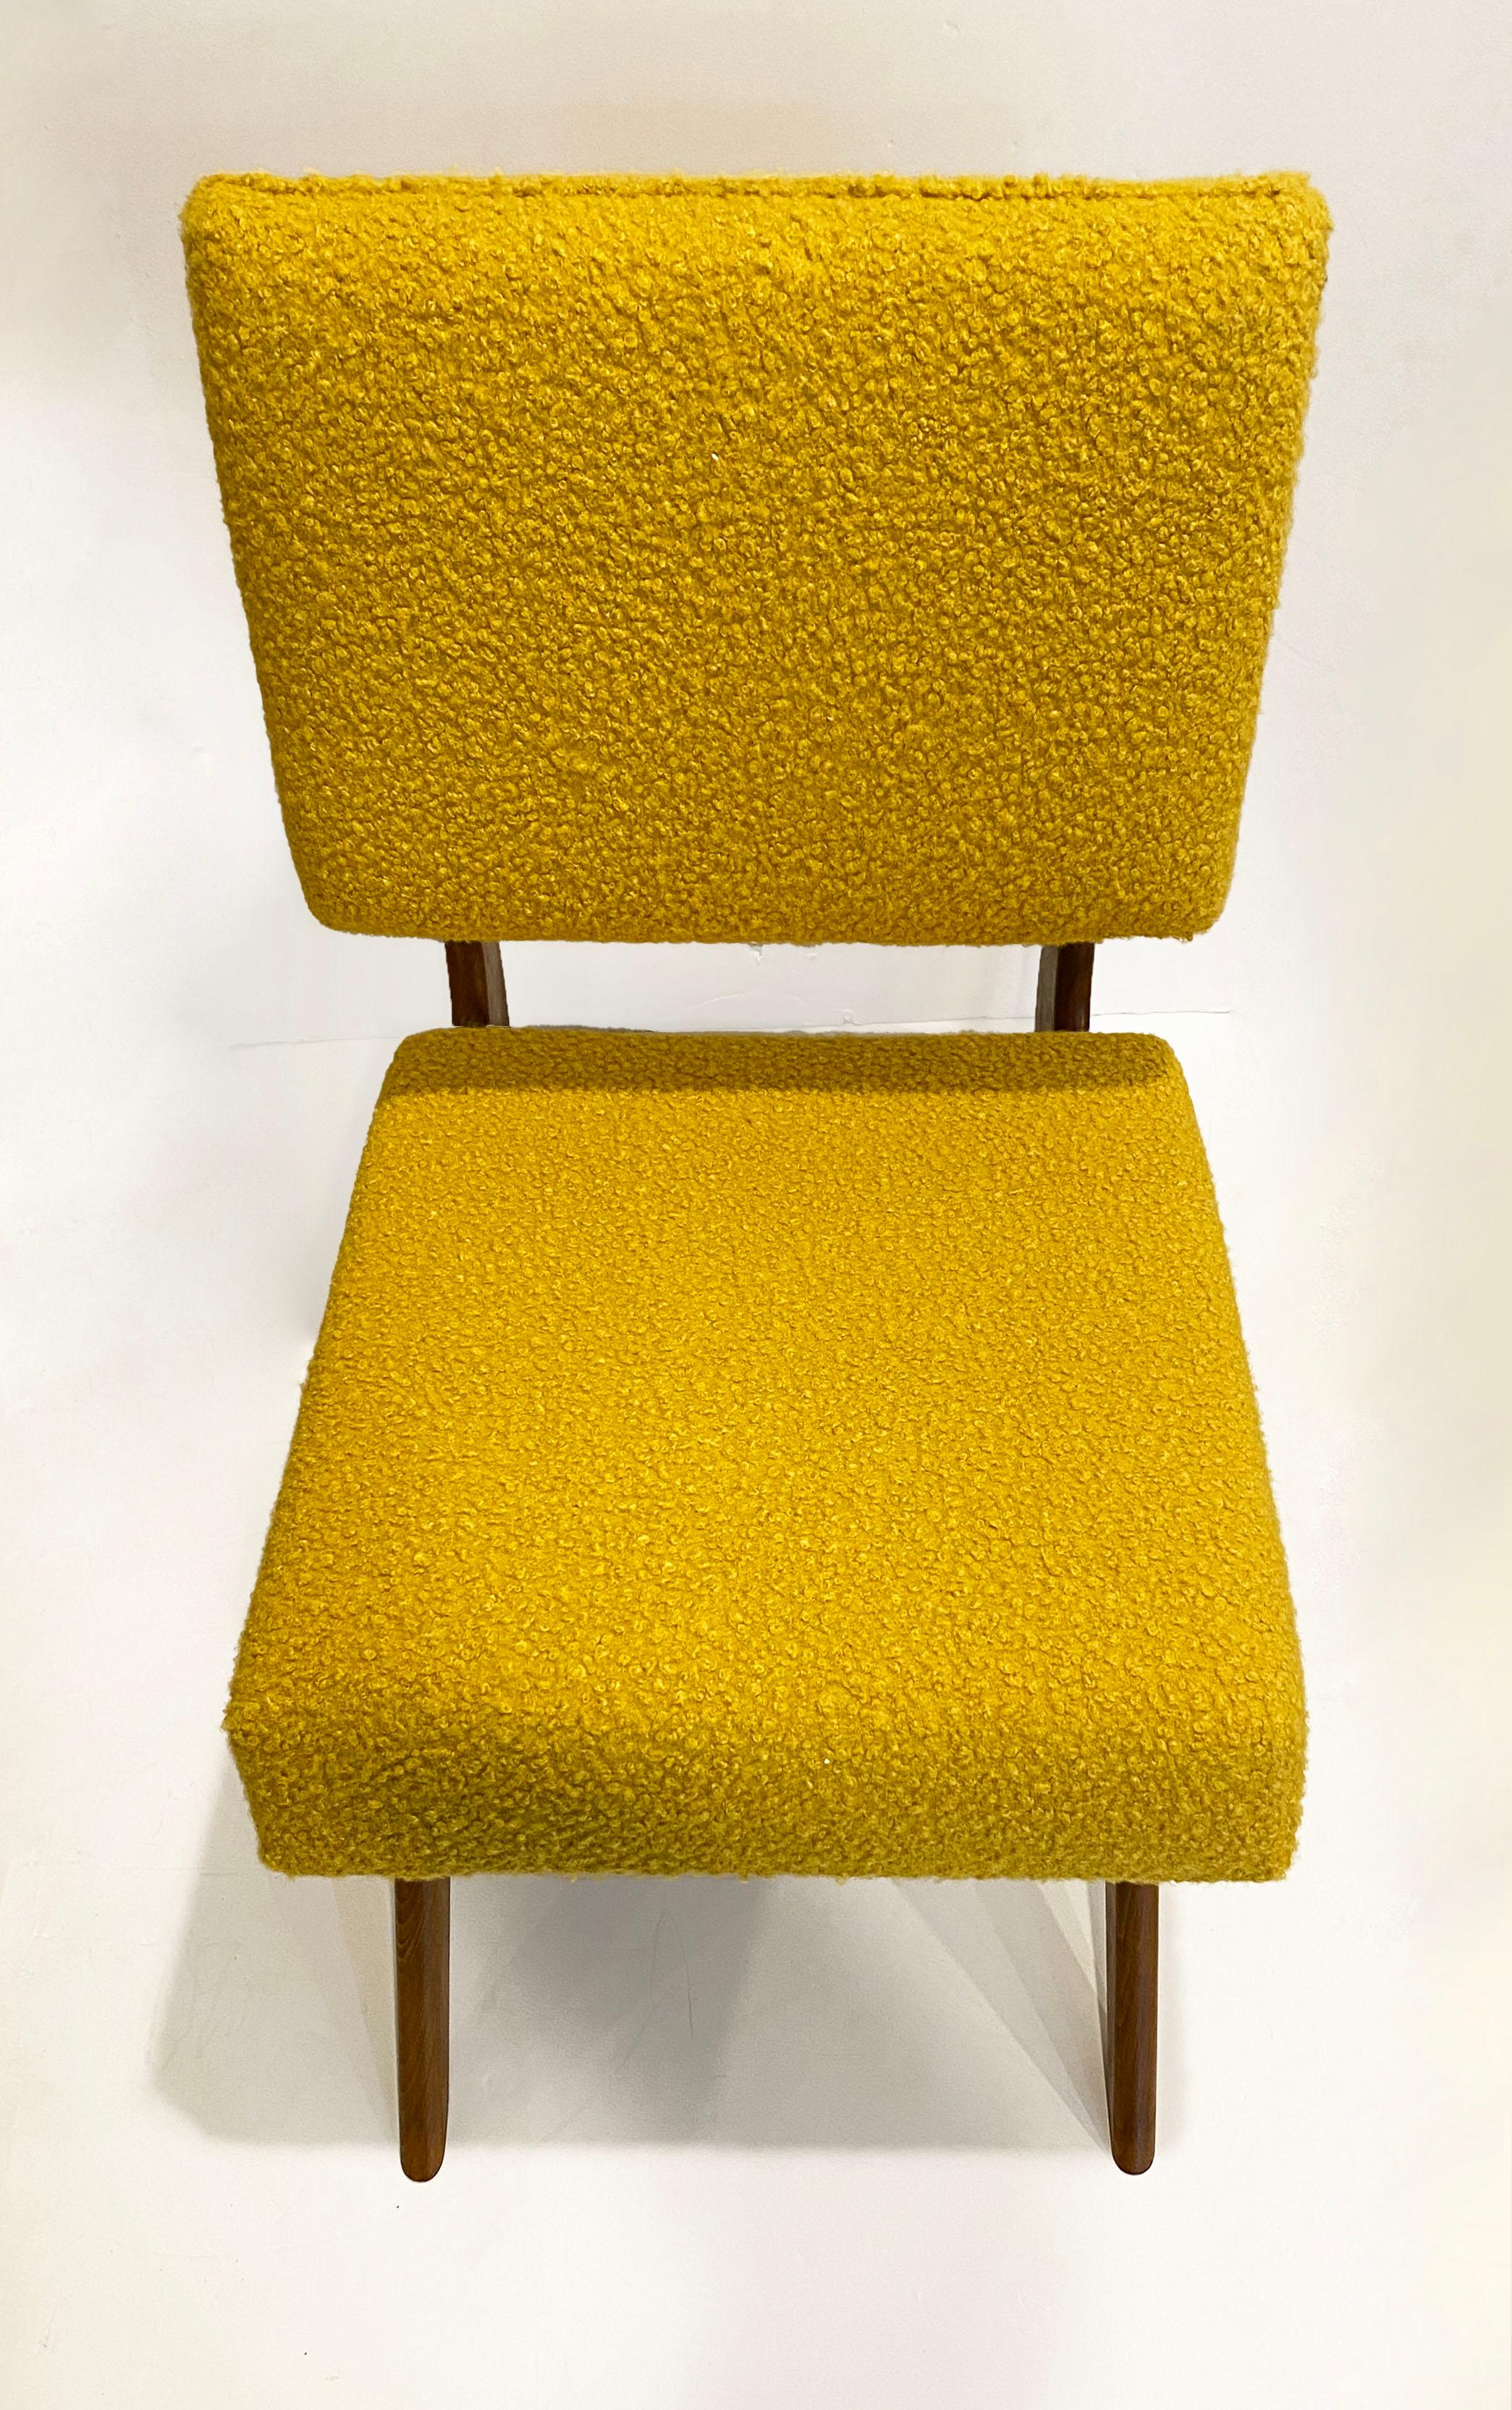 Bespoke Italian Pair of Boucle Mustard Yellow Aero Curved Beech Lounge Chairs For Sale 10